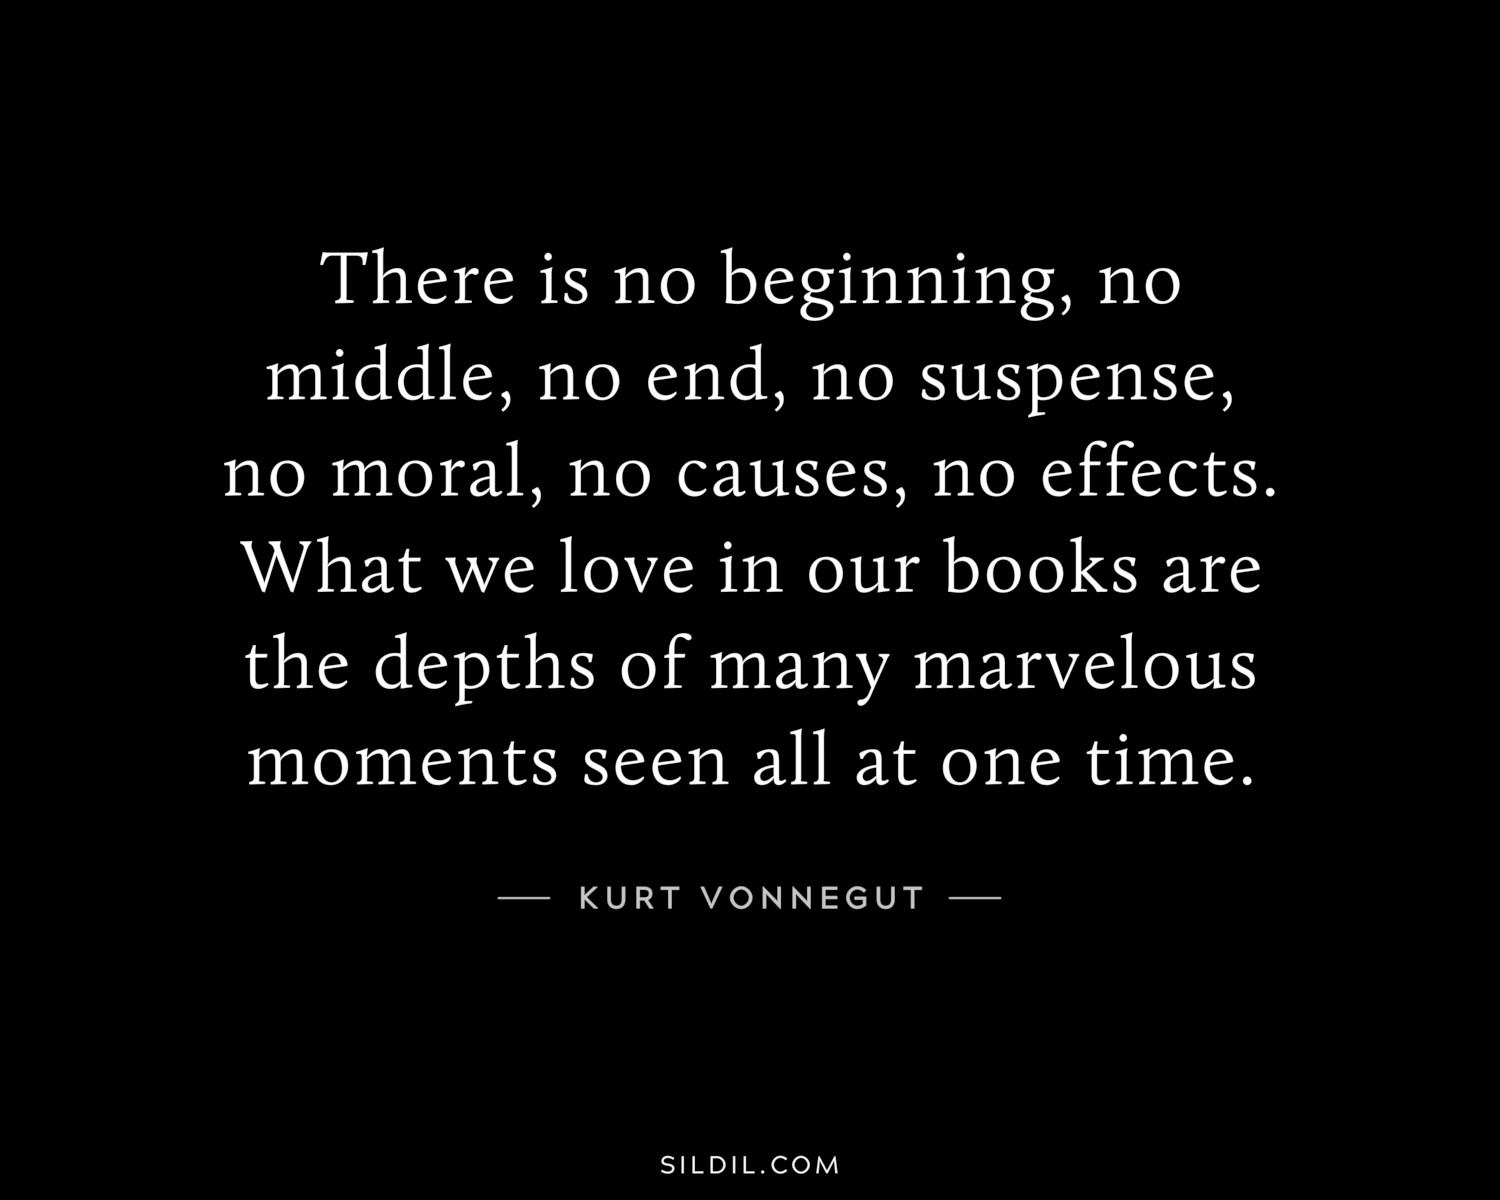 There is no beginning, no middle, no end, no suspense, no moral, no causes, no effects. What we love in our books are the depths of many marvelous moments seen all at one time.